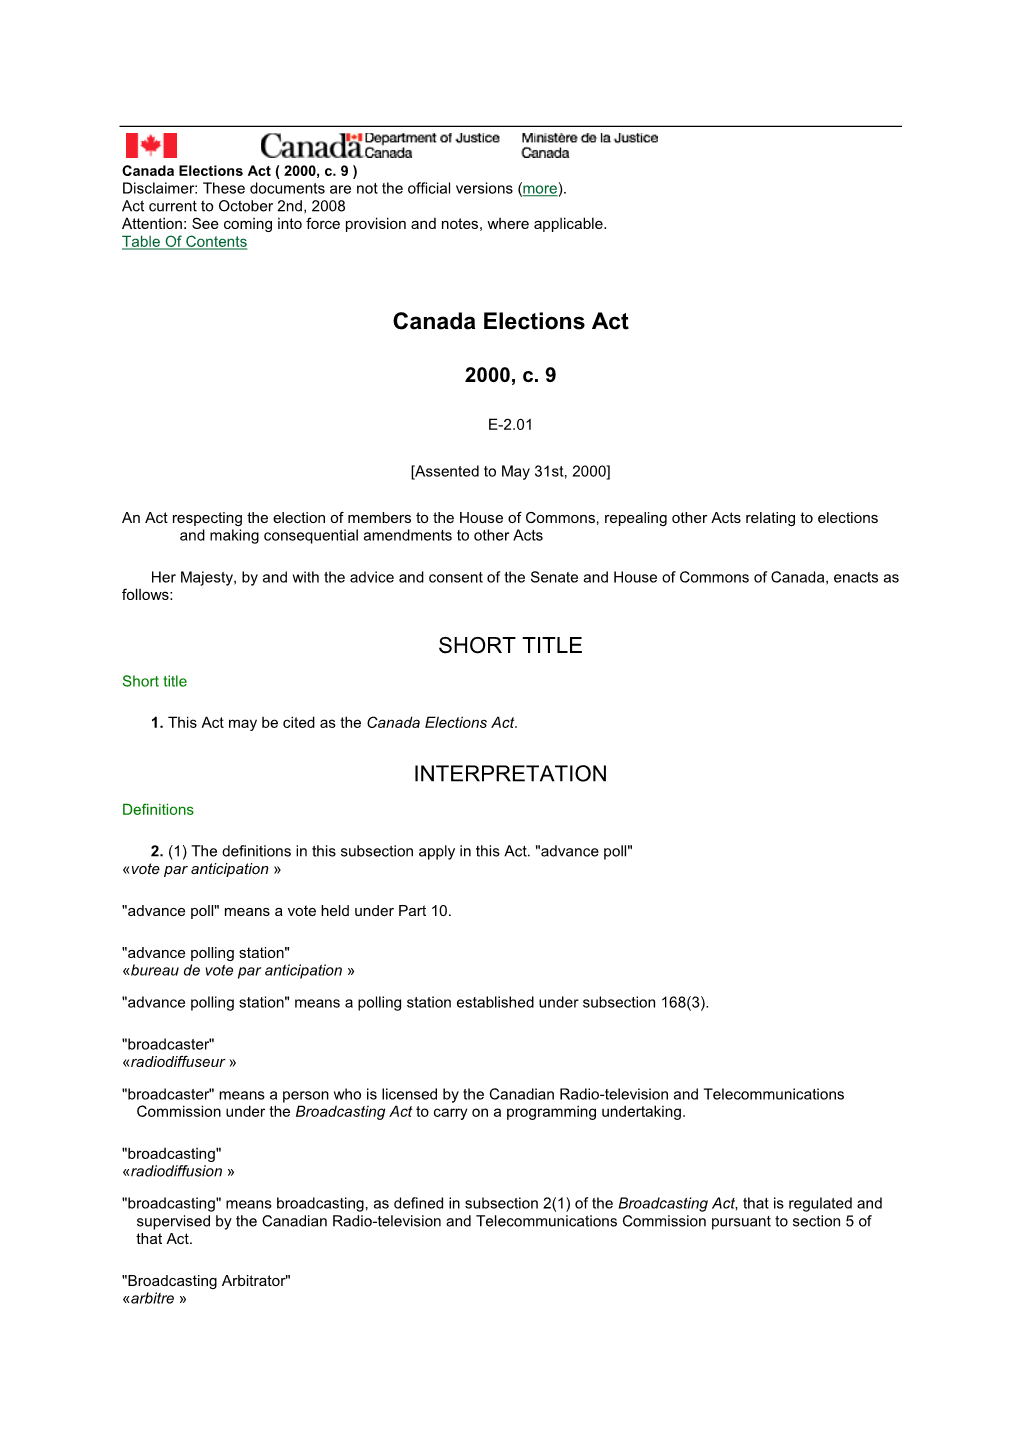 Canada Elections Act, 2000